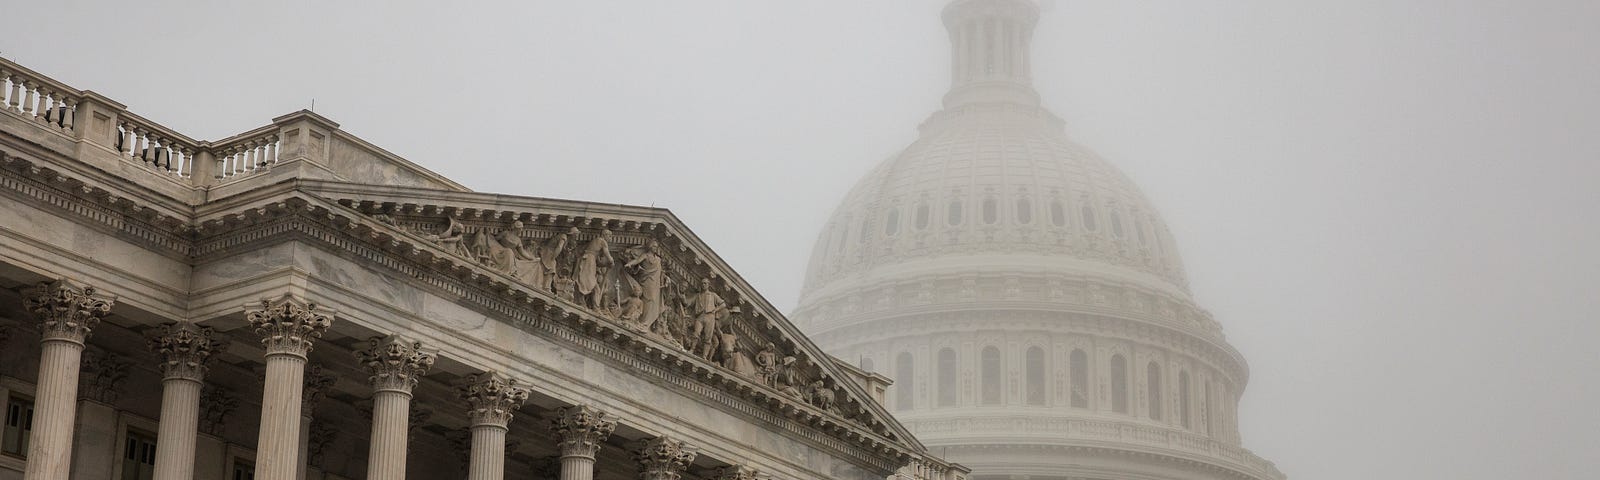 Thick fog envelopes the U.S. Capitol dome behind the U.S. House of Representatives on 4 November 2022 in Washington, DC. Photo by Samuel Corum/Getty Images